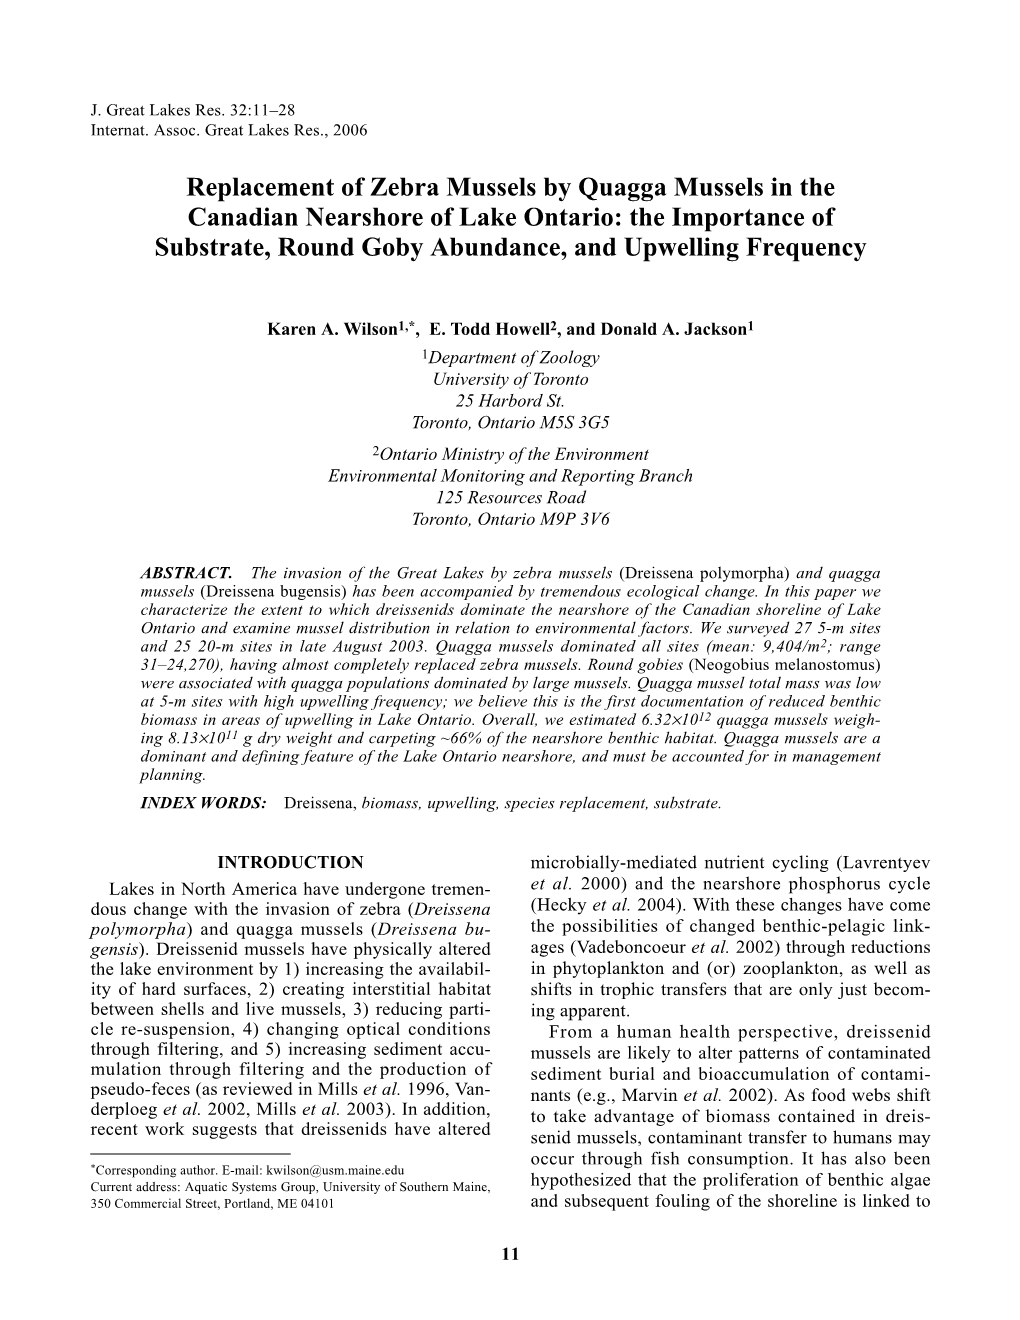 Replacement of Zebra Mussels by Quagga Mussels in the Canadian Nearshore of Lake Ontario: the Importance of Substrate, Round Goby Abundance, and Upwelling Frequency